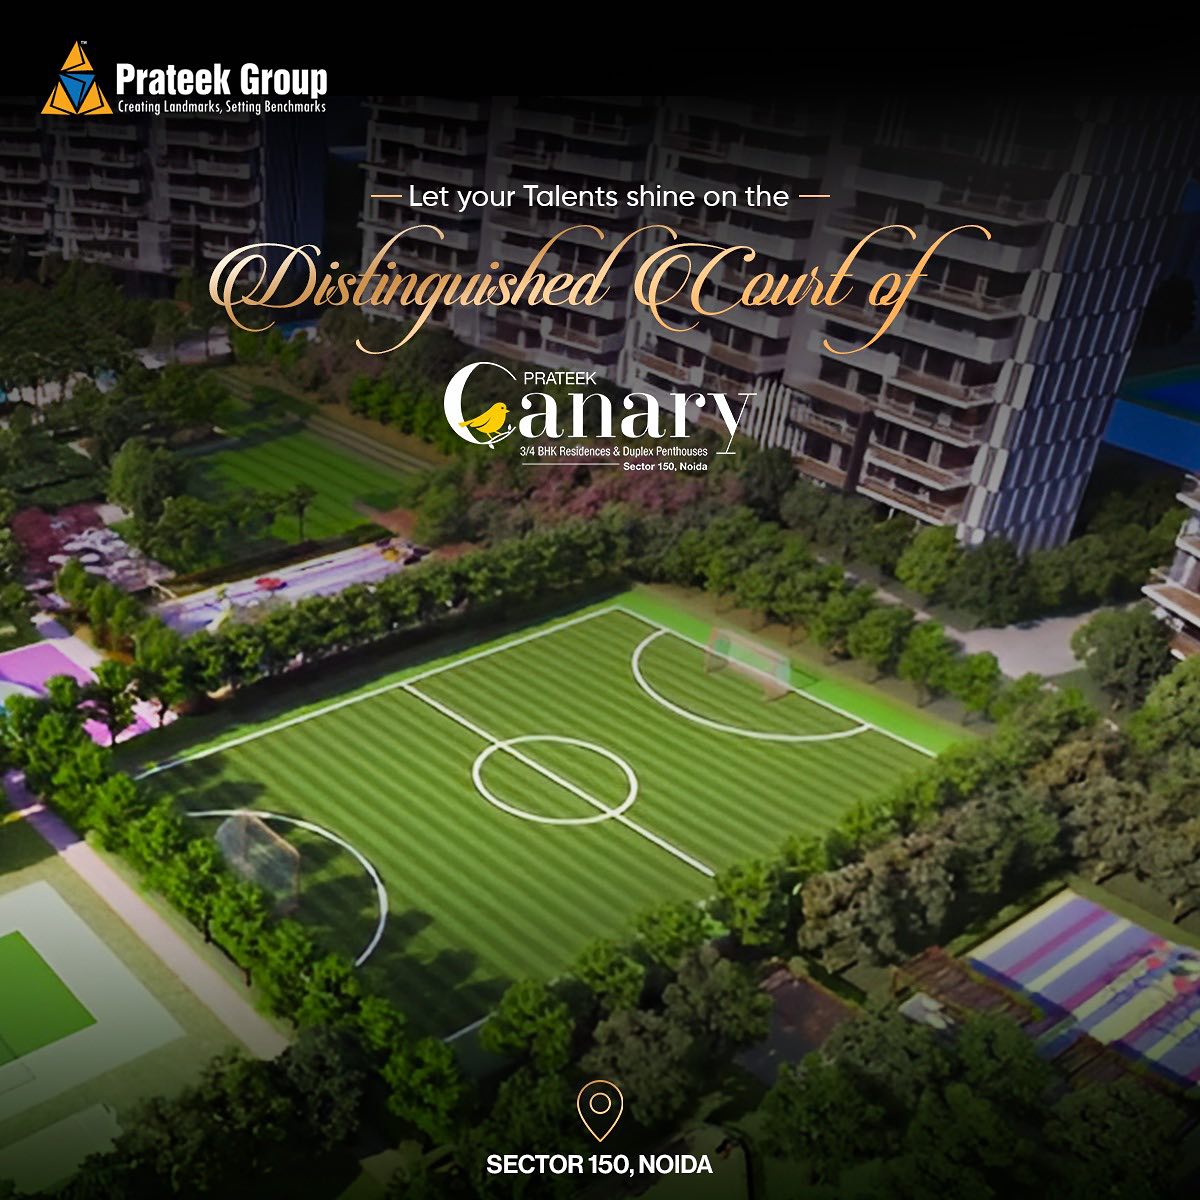 Let your Tealents shine on the Distinguished Court of Prateek Canary, Noida Update